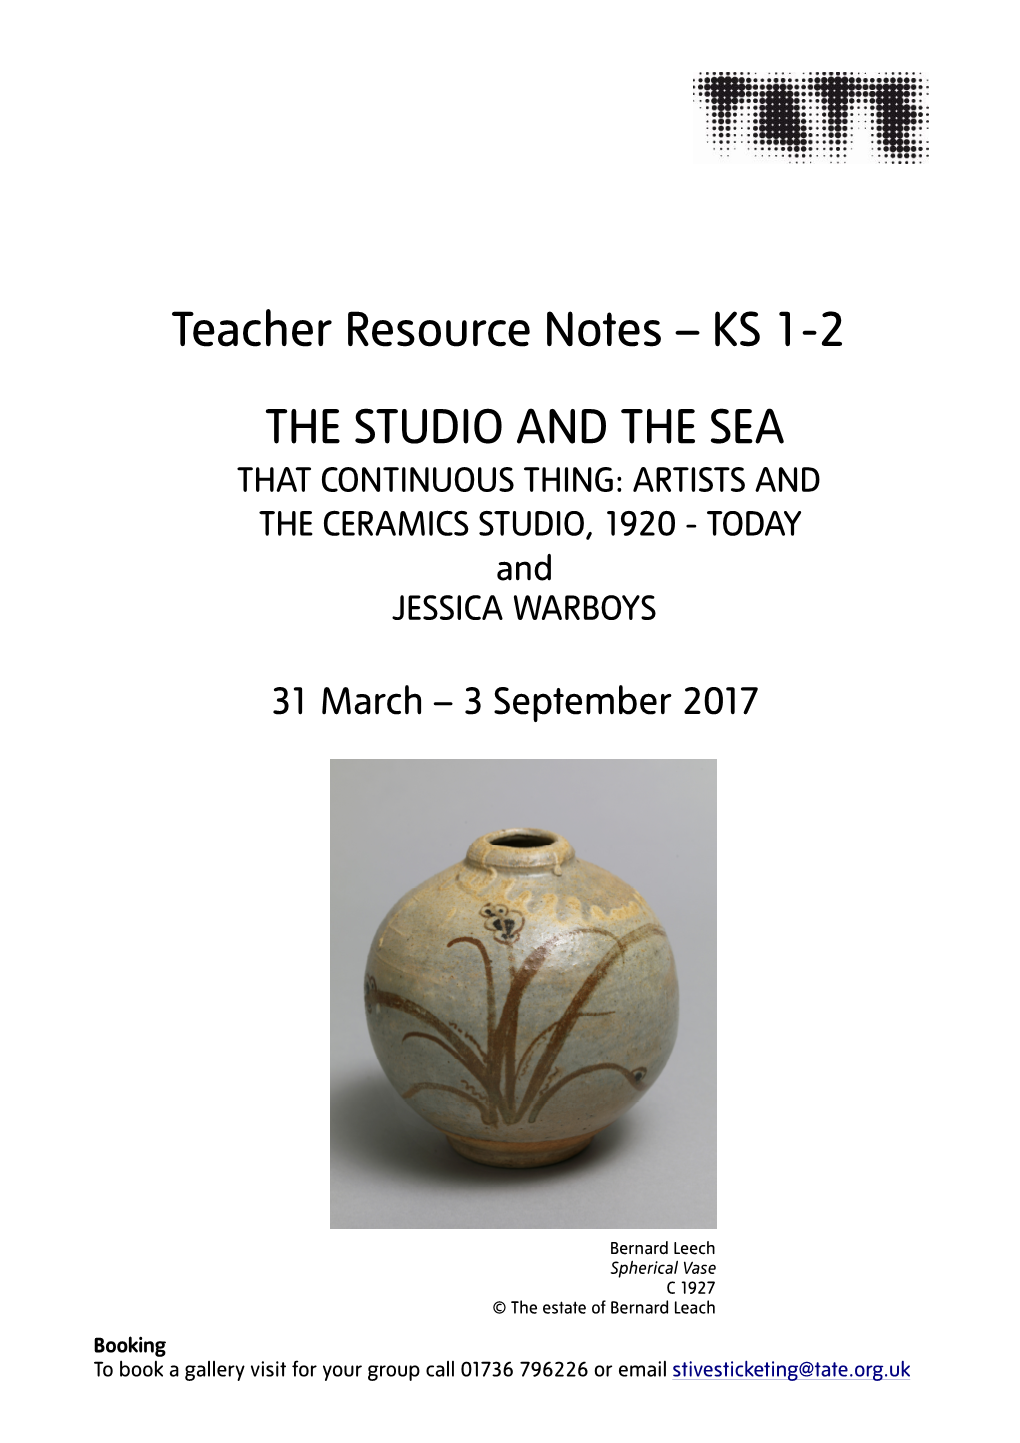 Teacher Resource Notes – KS 1-2 the STUDIO and THE